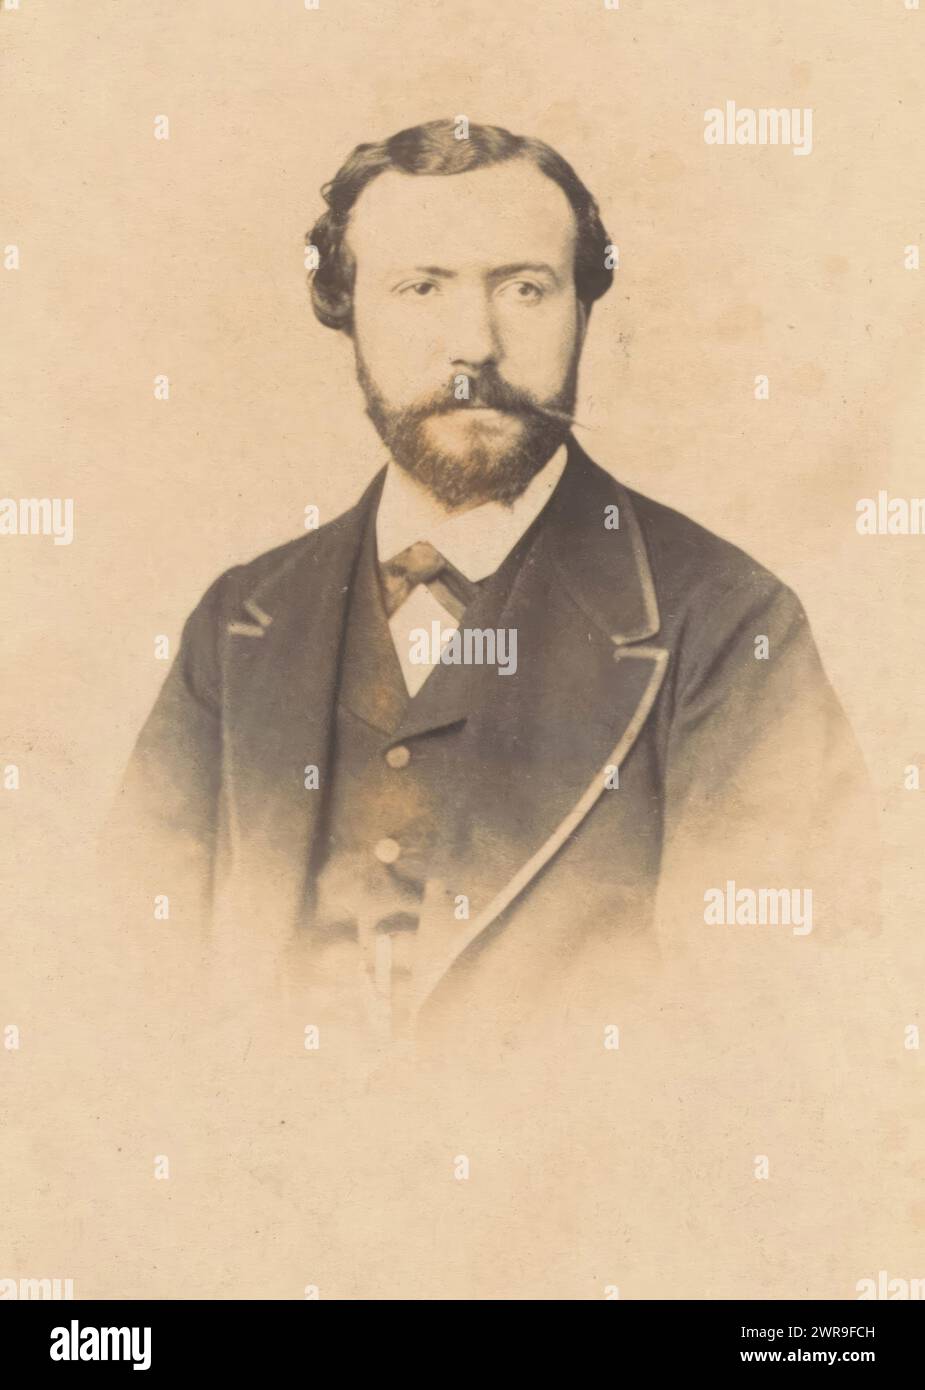 Portrait of a man with beard, This photo is part of an album., Susse frères Estienne et Cie., 1855 - 1865, cardboard, albumen print, height 85 mm × width 52 mm, photograph Stock Photo